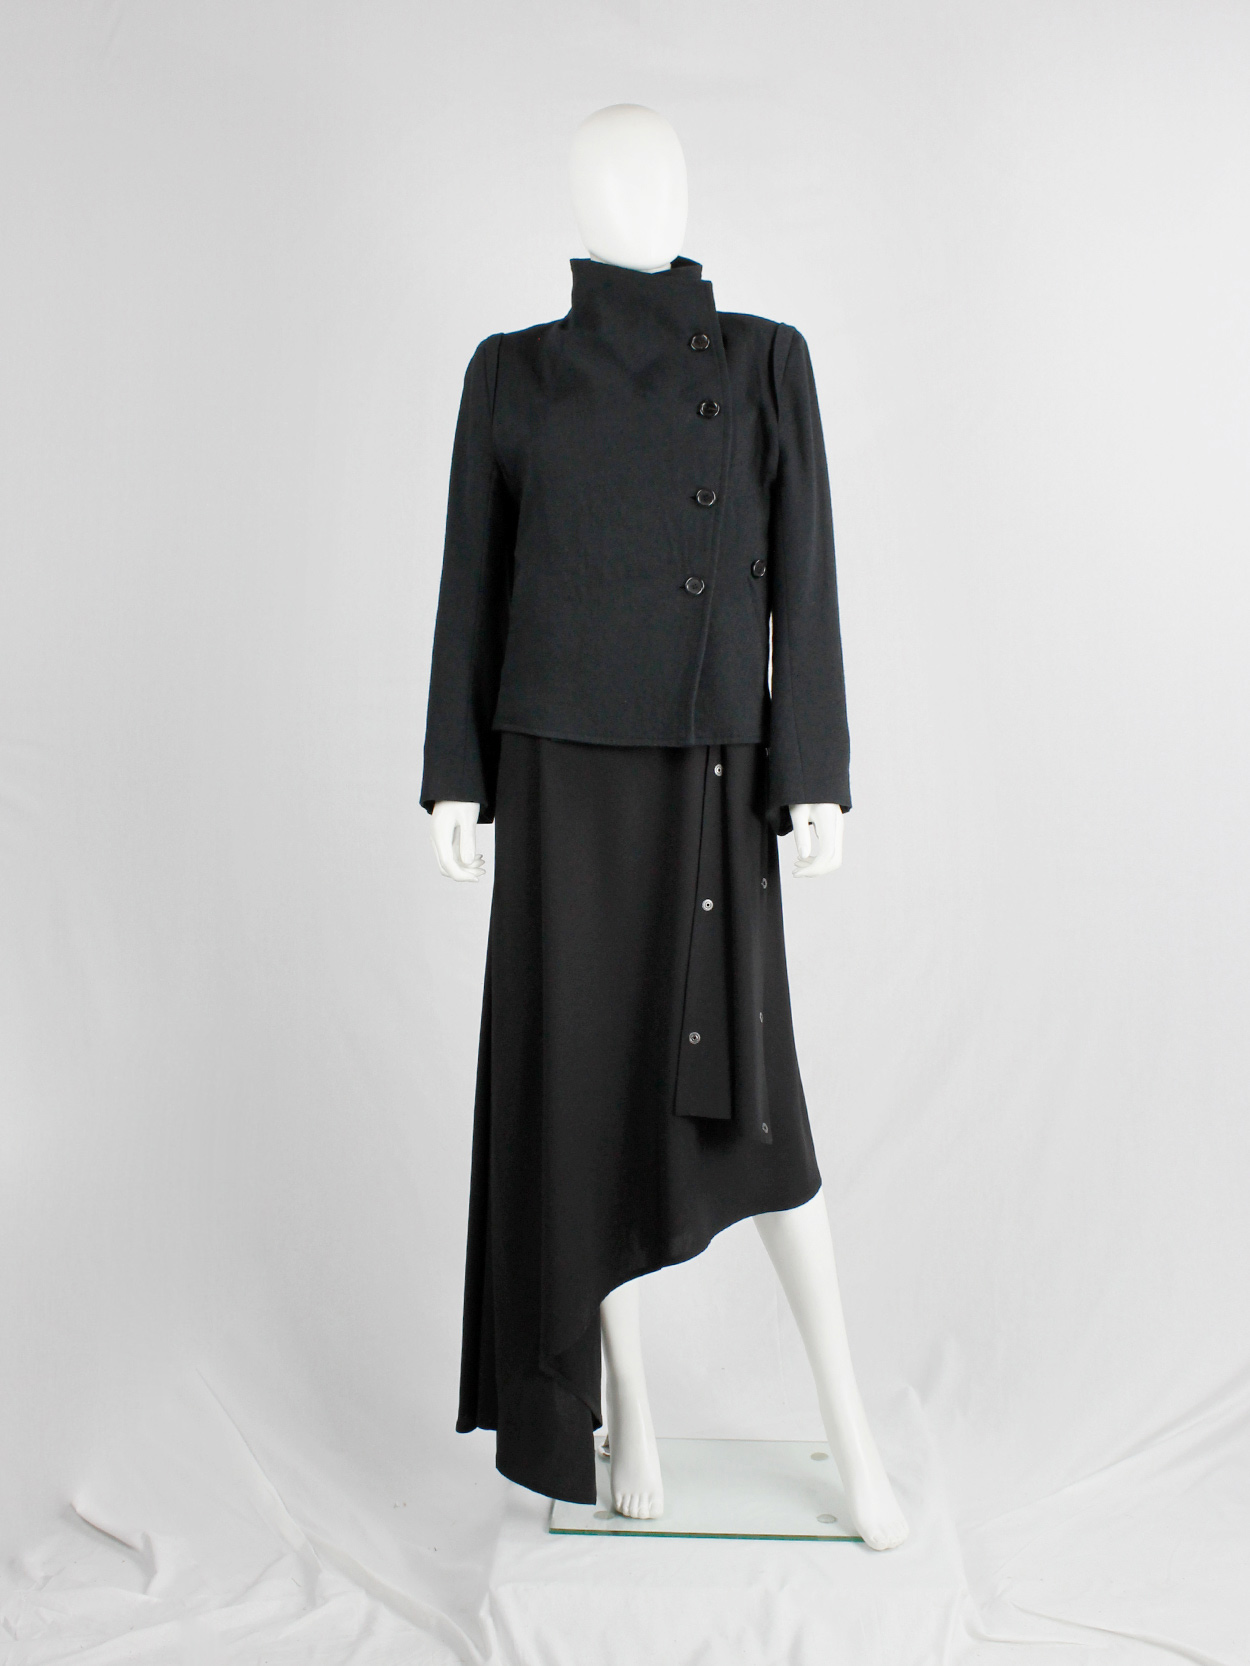 Ann Demeulemeester black coat with standing neckline and asymmetric button closure fall 2010 (12)